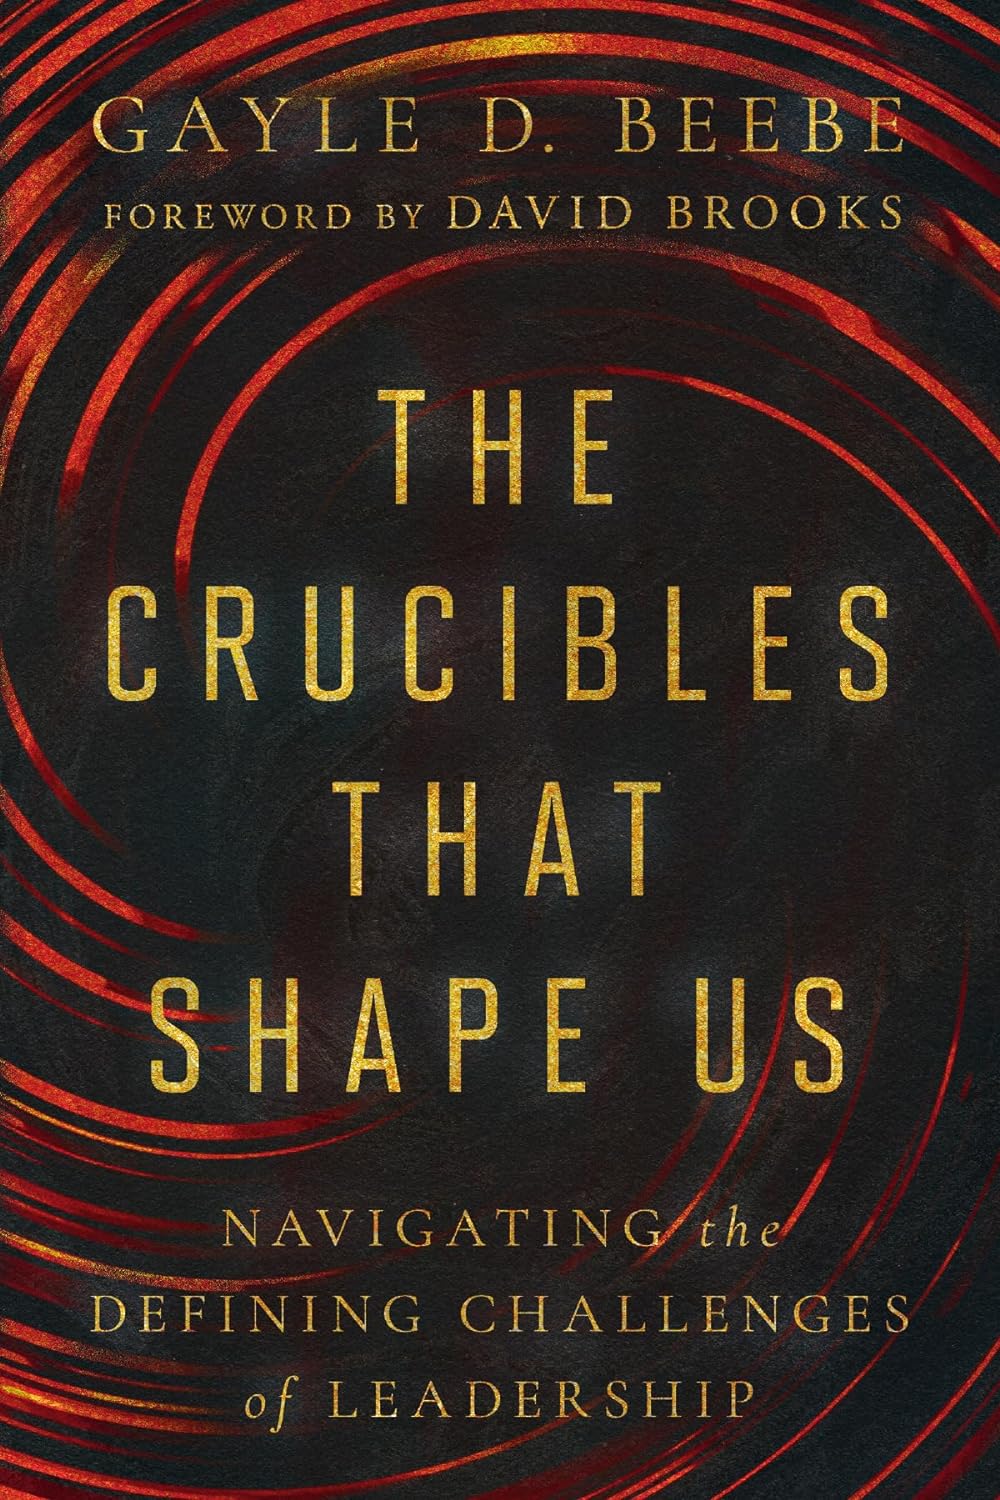 The Crucibles That Shape Us: Navigating the Defining Challenges of Leadership